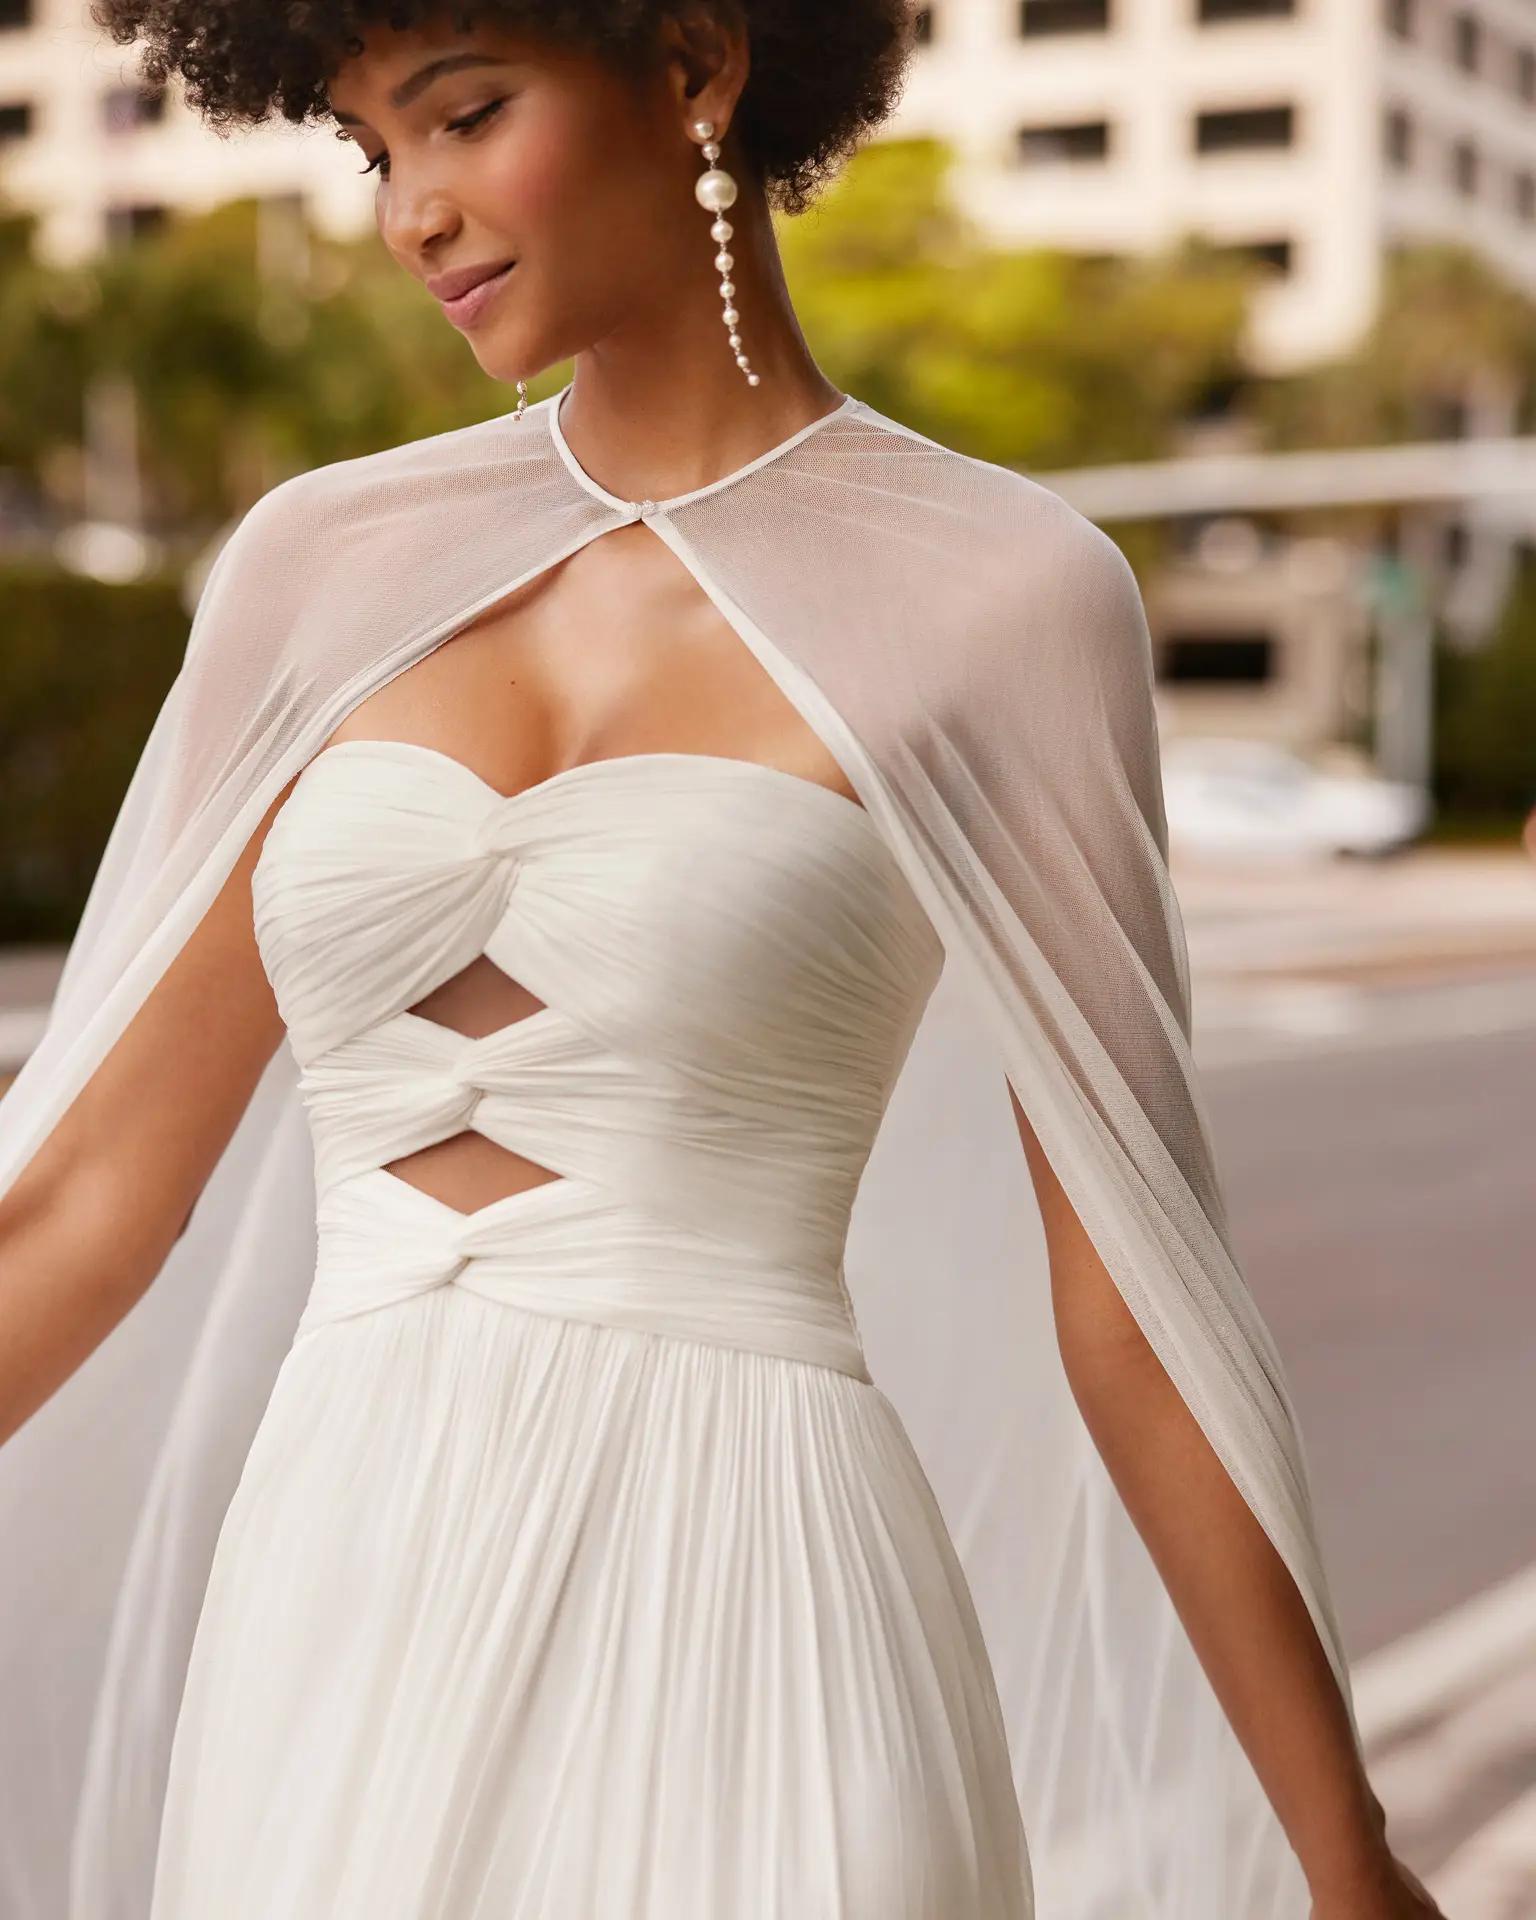 Kaily wedding dress by Rosa Clara in Columbus, Ohio with front bodice cutouts, bridal cape, and flowy chiffon skirt with a slit